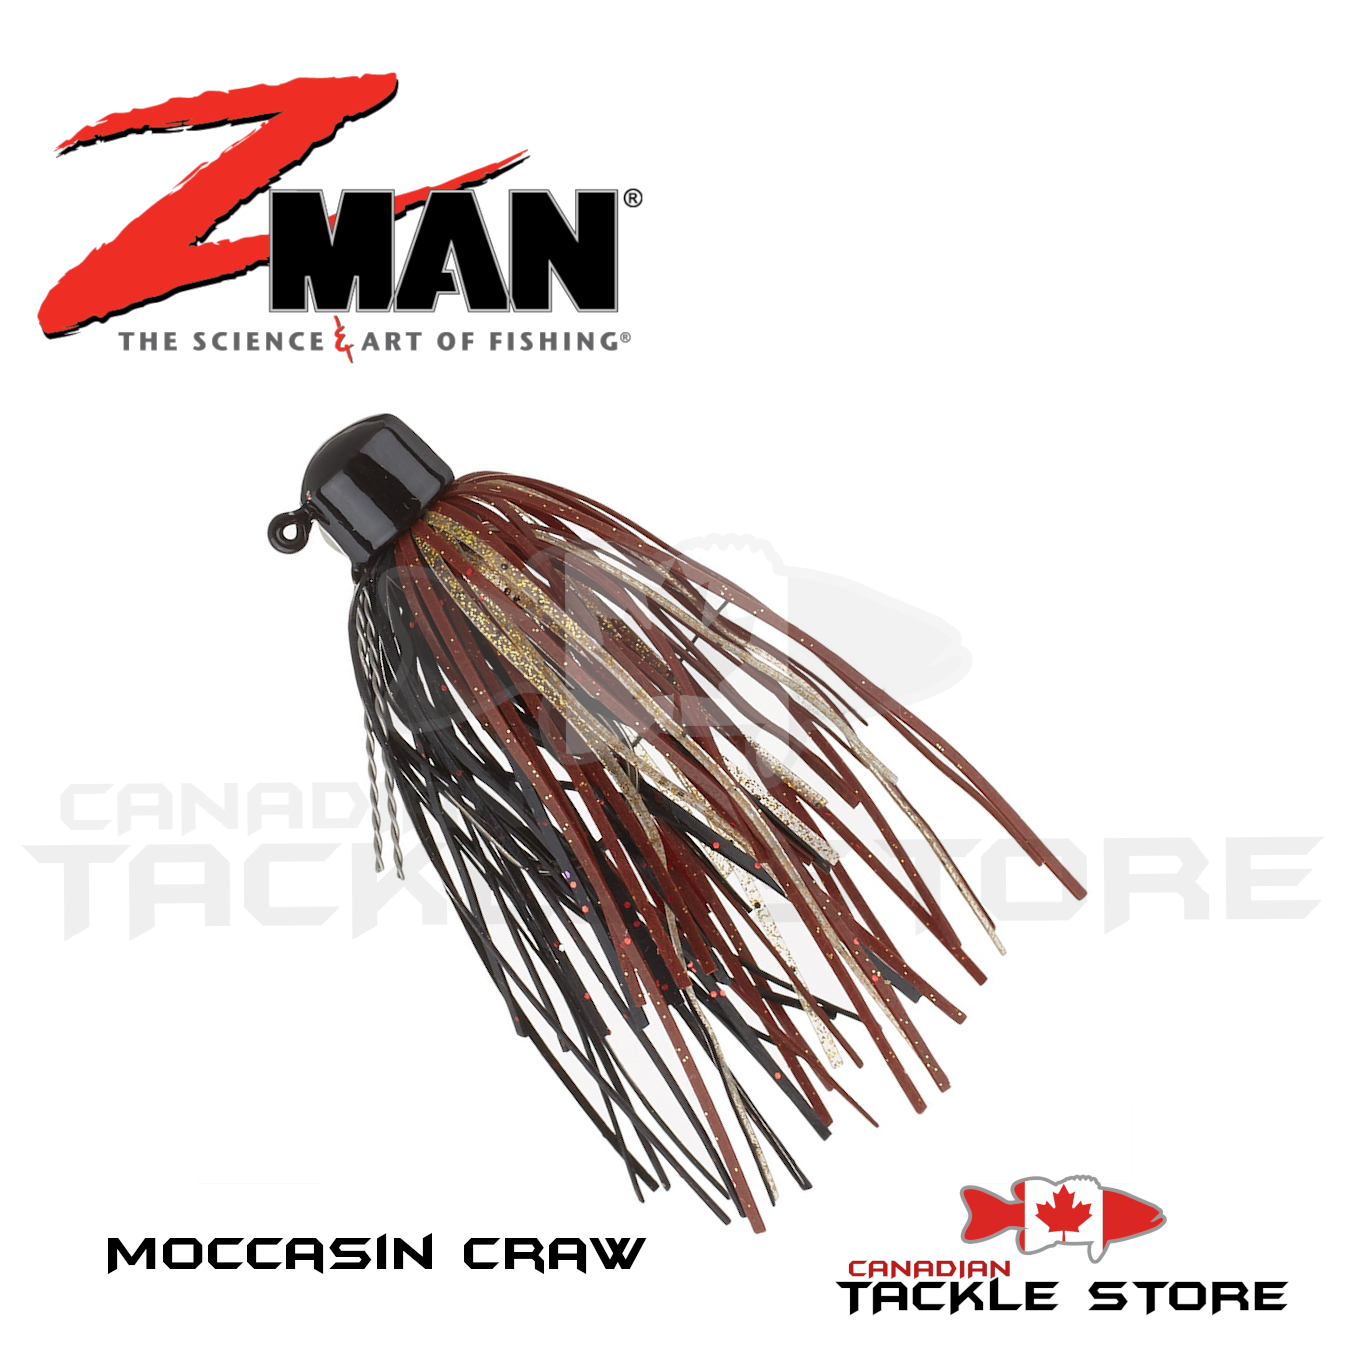 Z-Man – Canadian Tackle Store